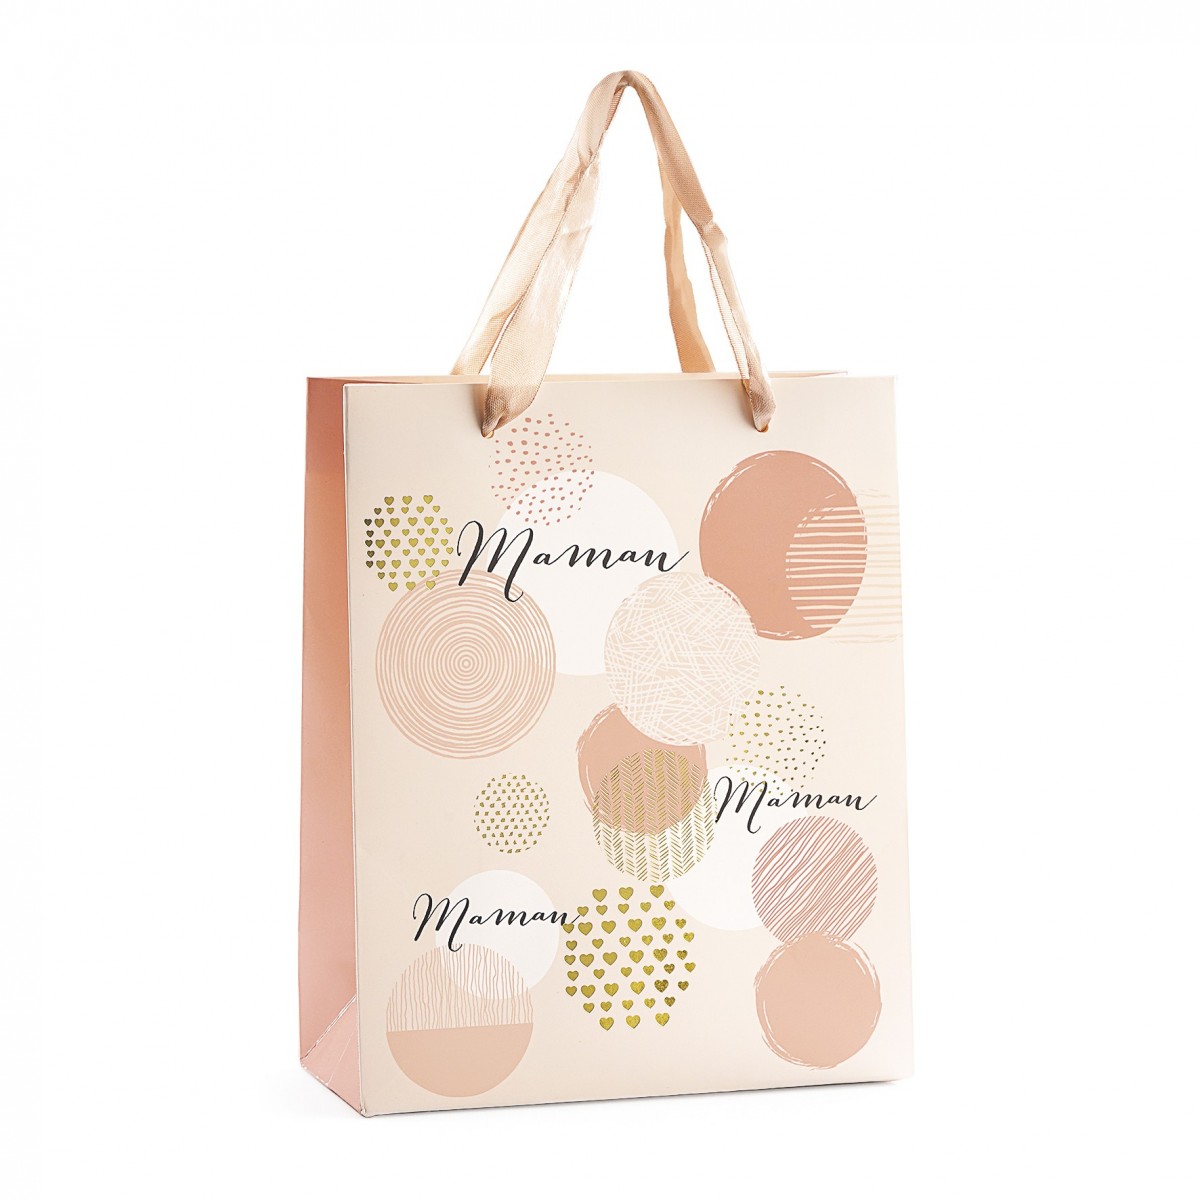 BAG "MAMAN" BEIGE PINK AND GOLD 18X8X22CM